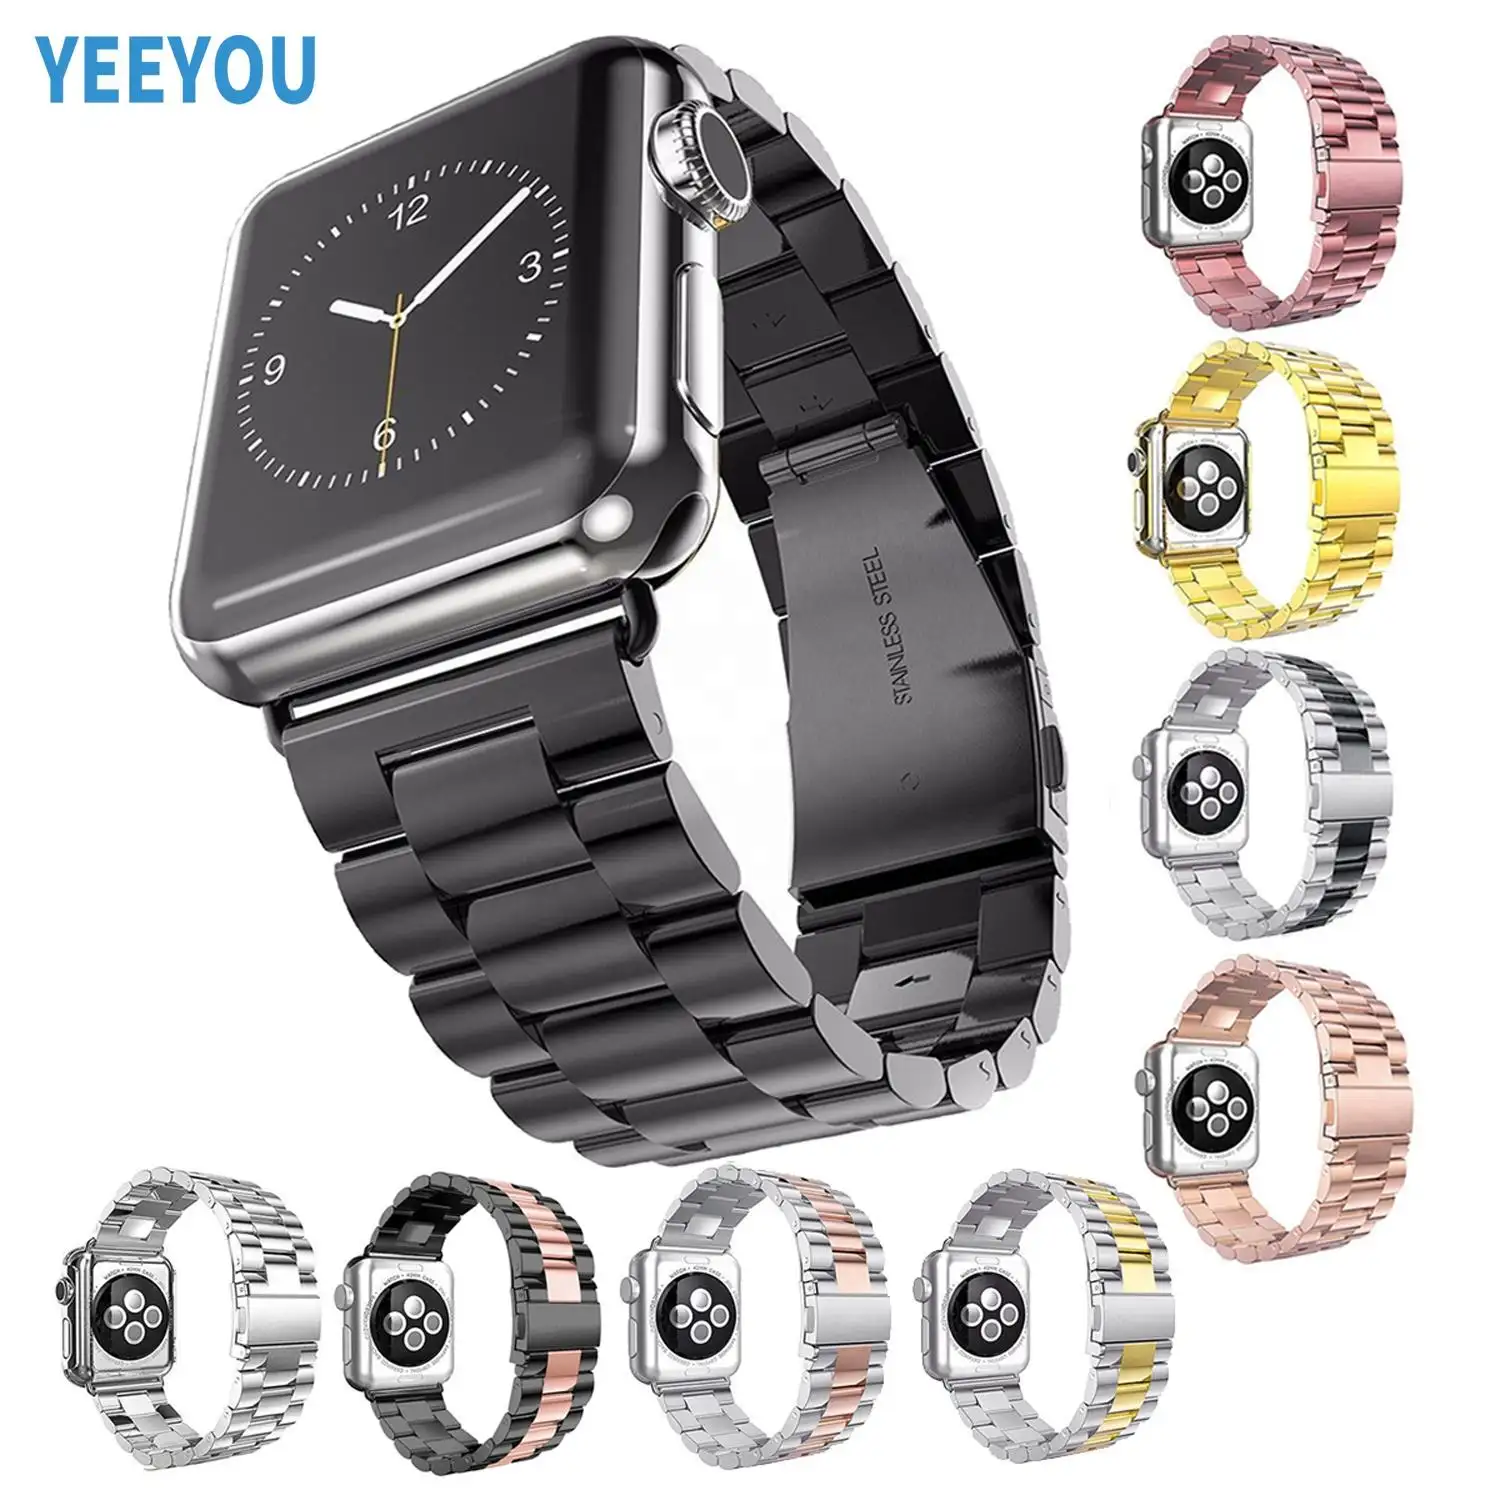 Smart Band 3 Beads Stainless Steel Link Watch Bands Metal Bracelet for Apple Watch Strap 38 mm 42 mm iWatch Series